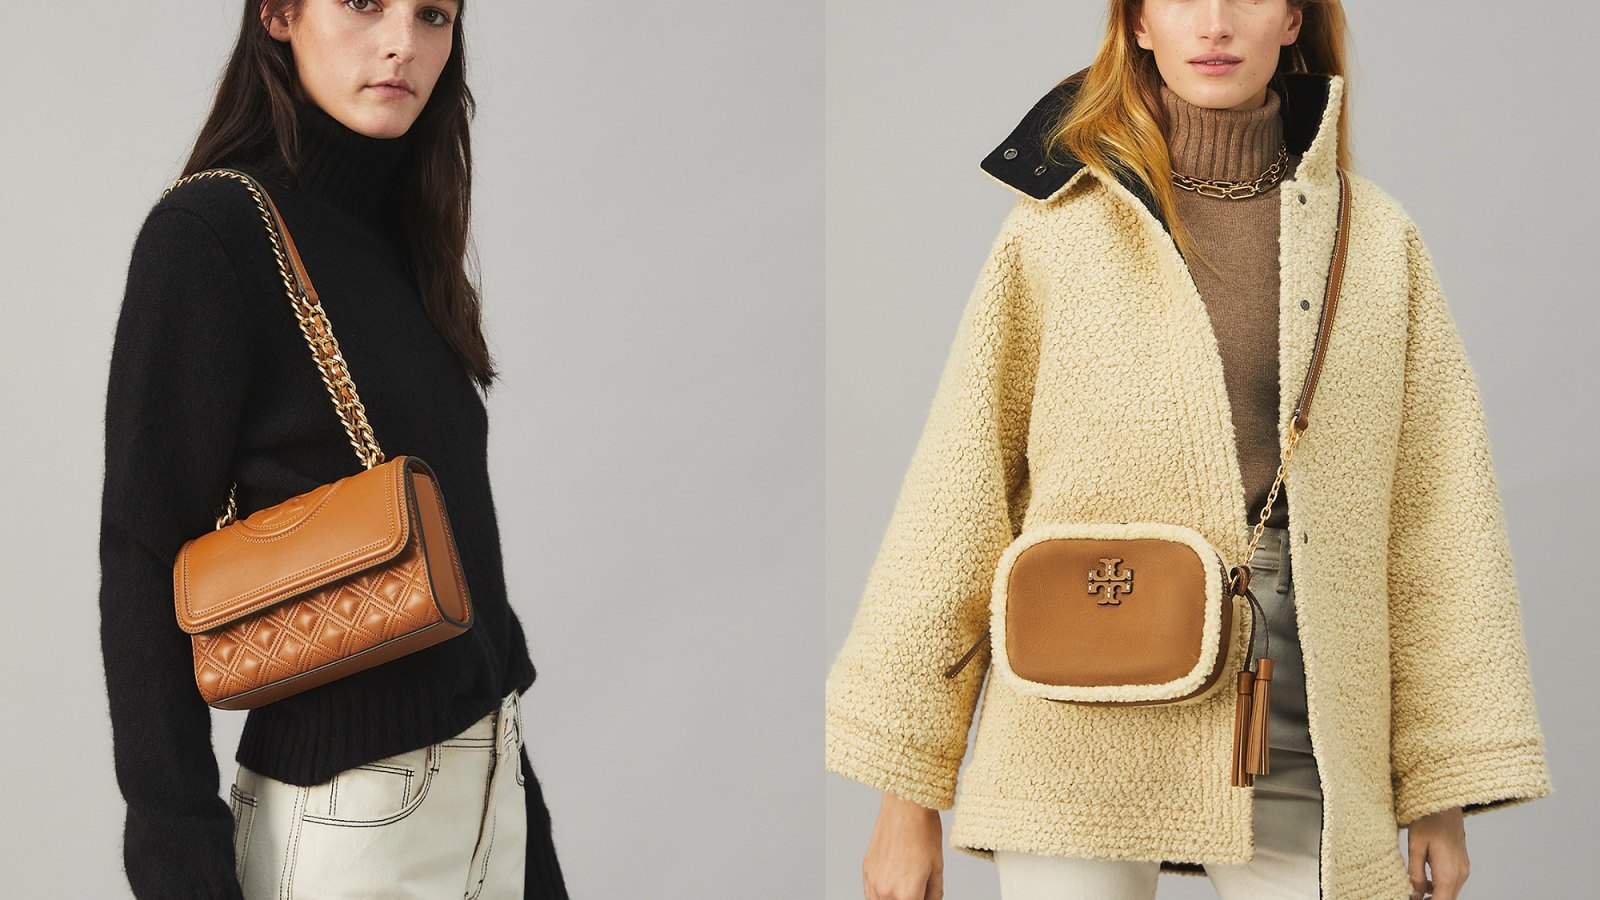 10 Tory Burch Pieces on Sale Now for Fall Fashion